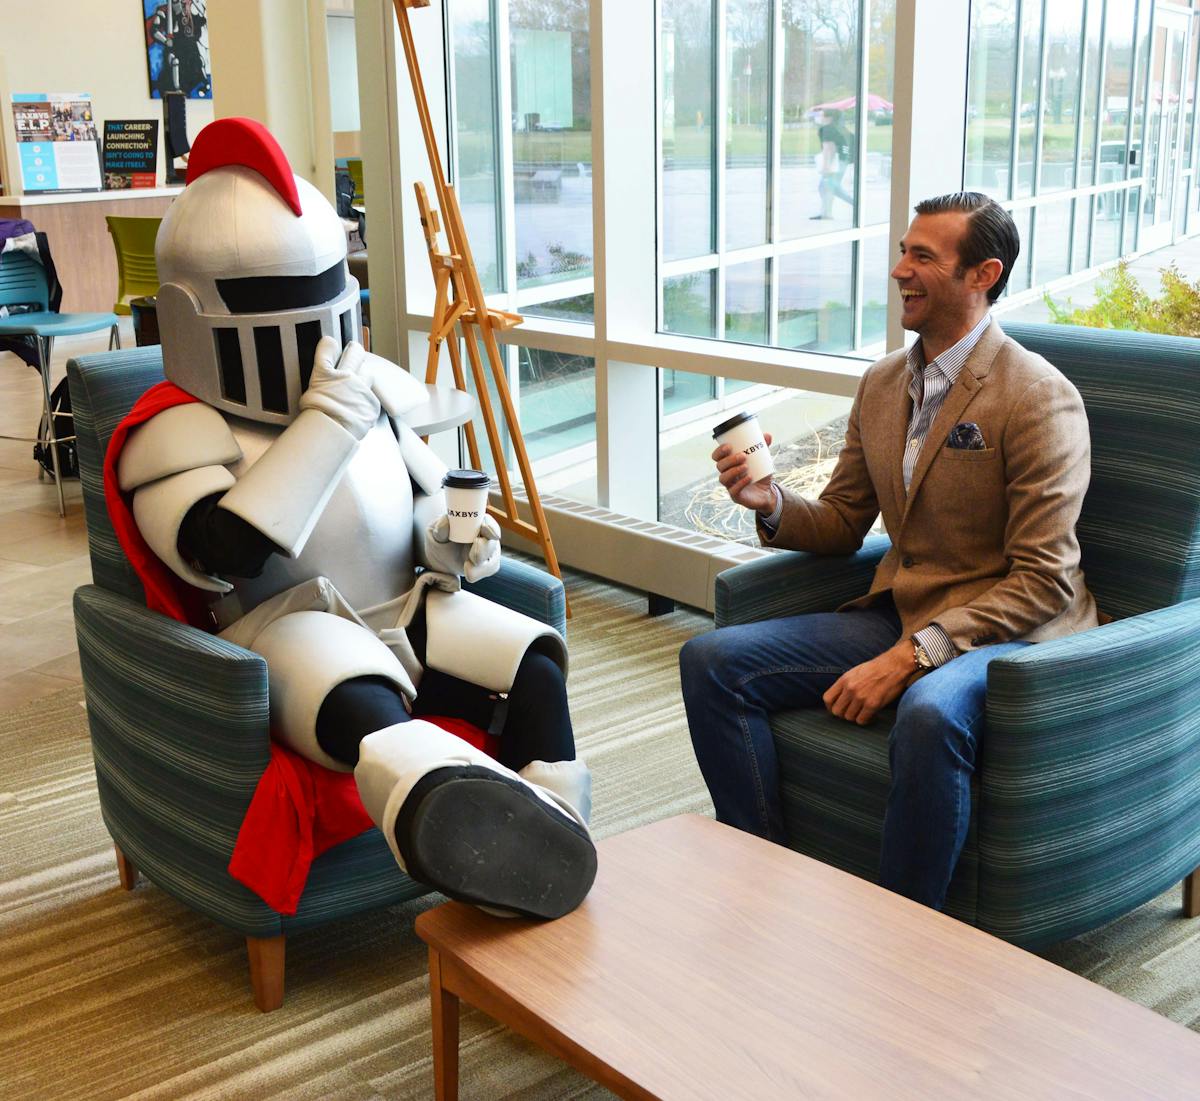 RCBC mascot, Baron, and Saxbys CEO, Nick Bauer sit on two chairs and laugh. Both holding a cup of Saxbys coffee